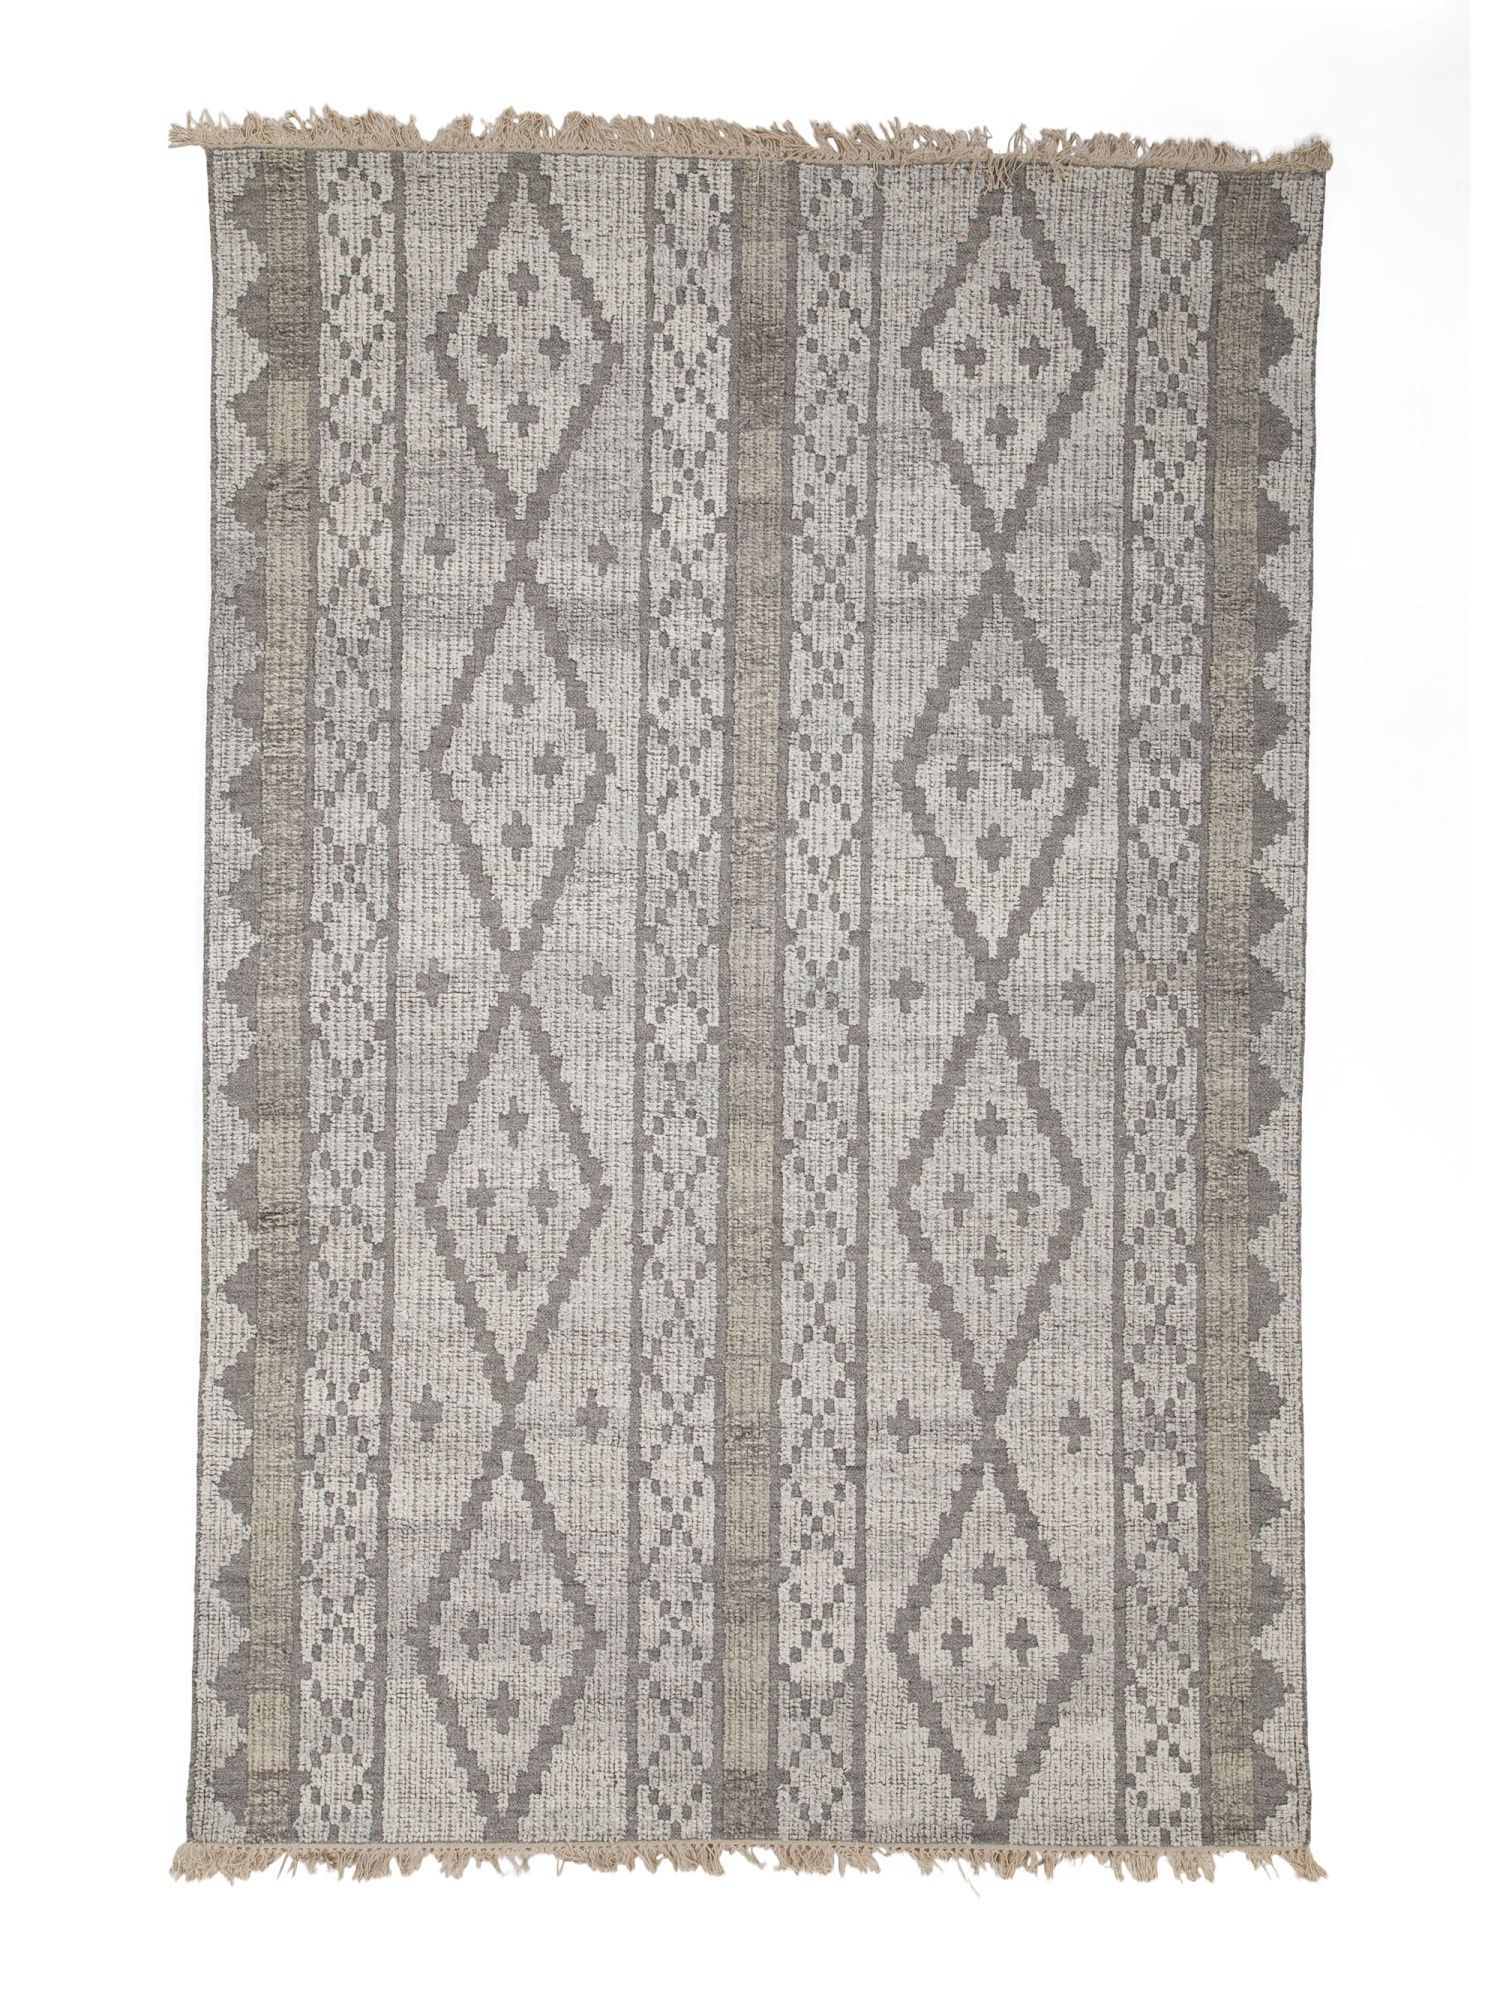 Wool Blend Handwoven In India Luxury Area Rug | TJ Maxx